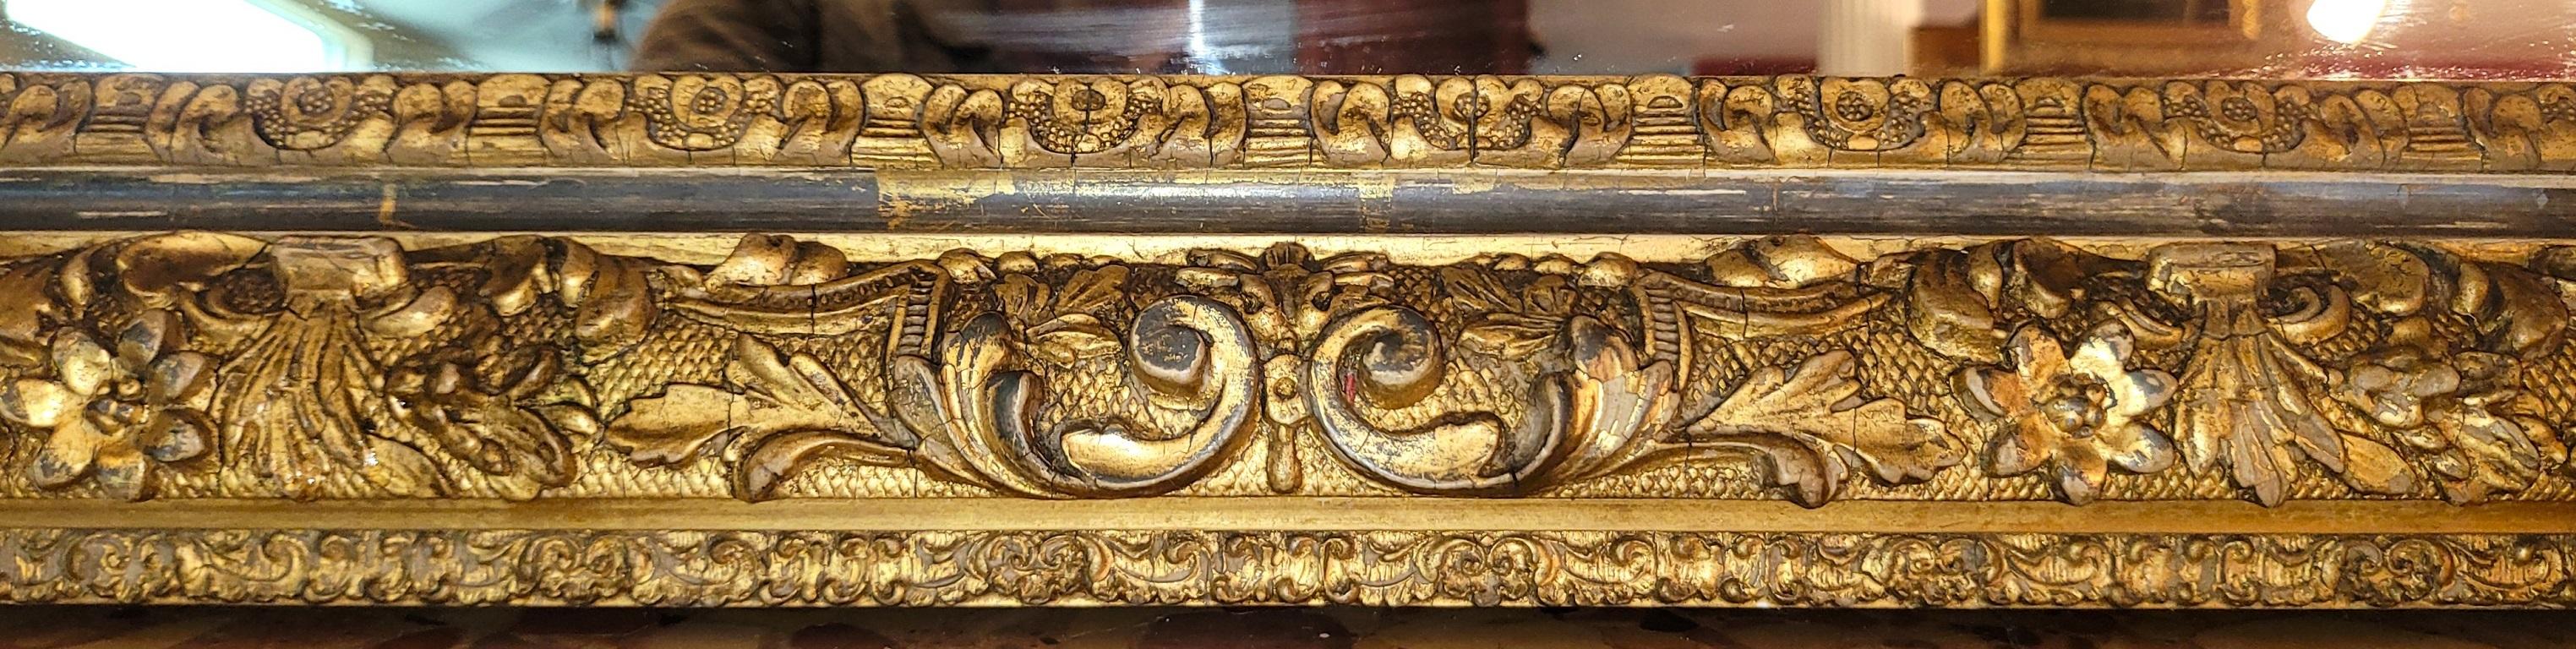 19th Century English Baroque Gilt Floral Wall Mirror For Sale 4